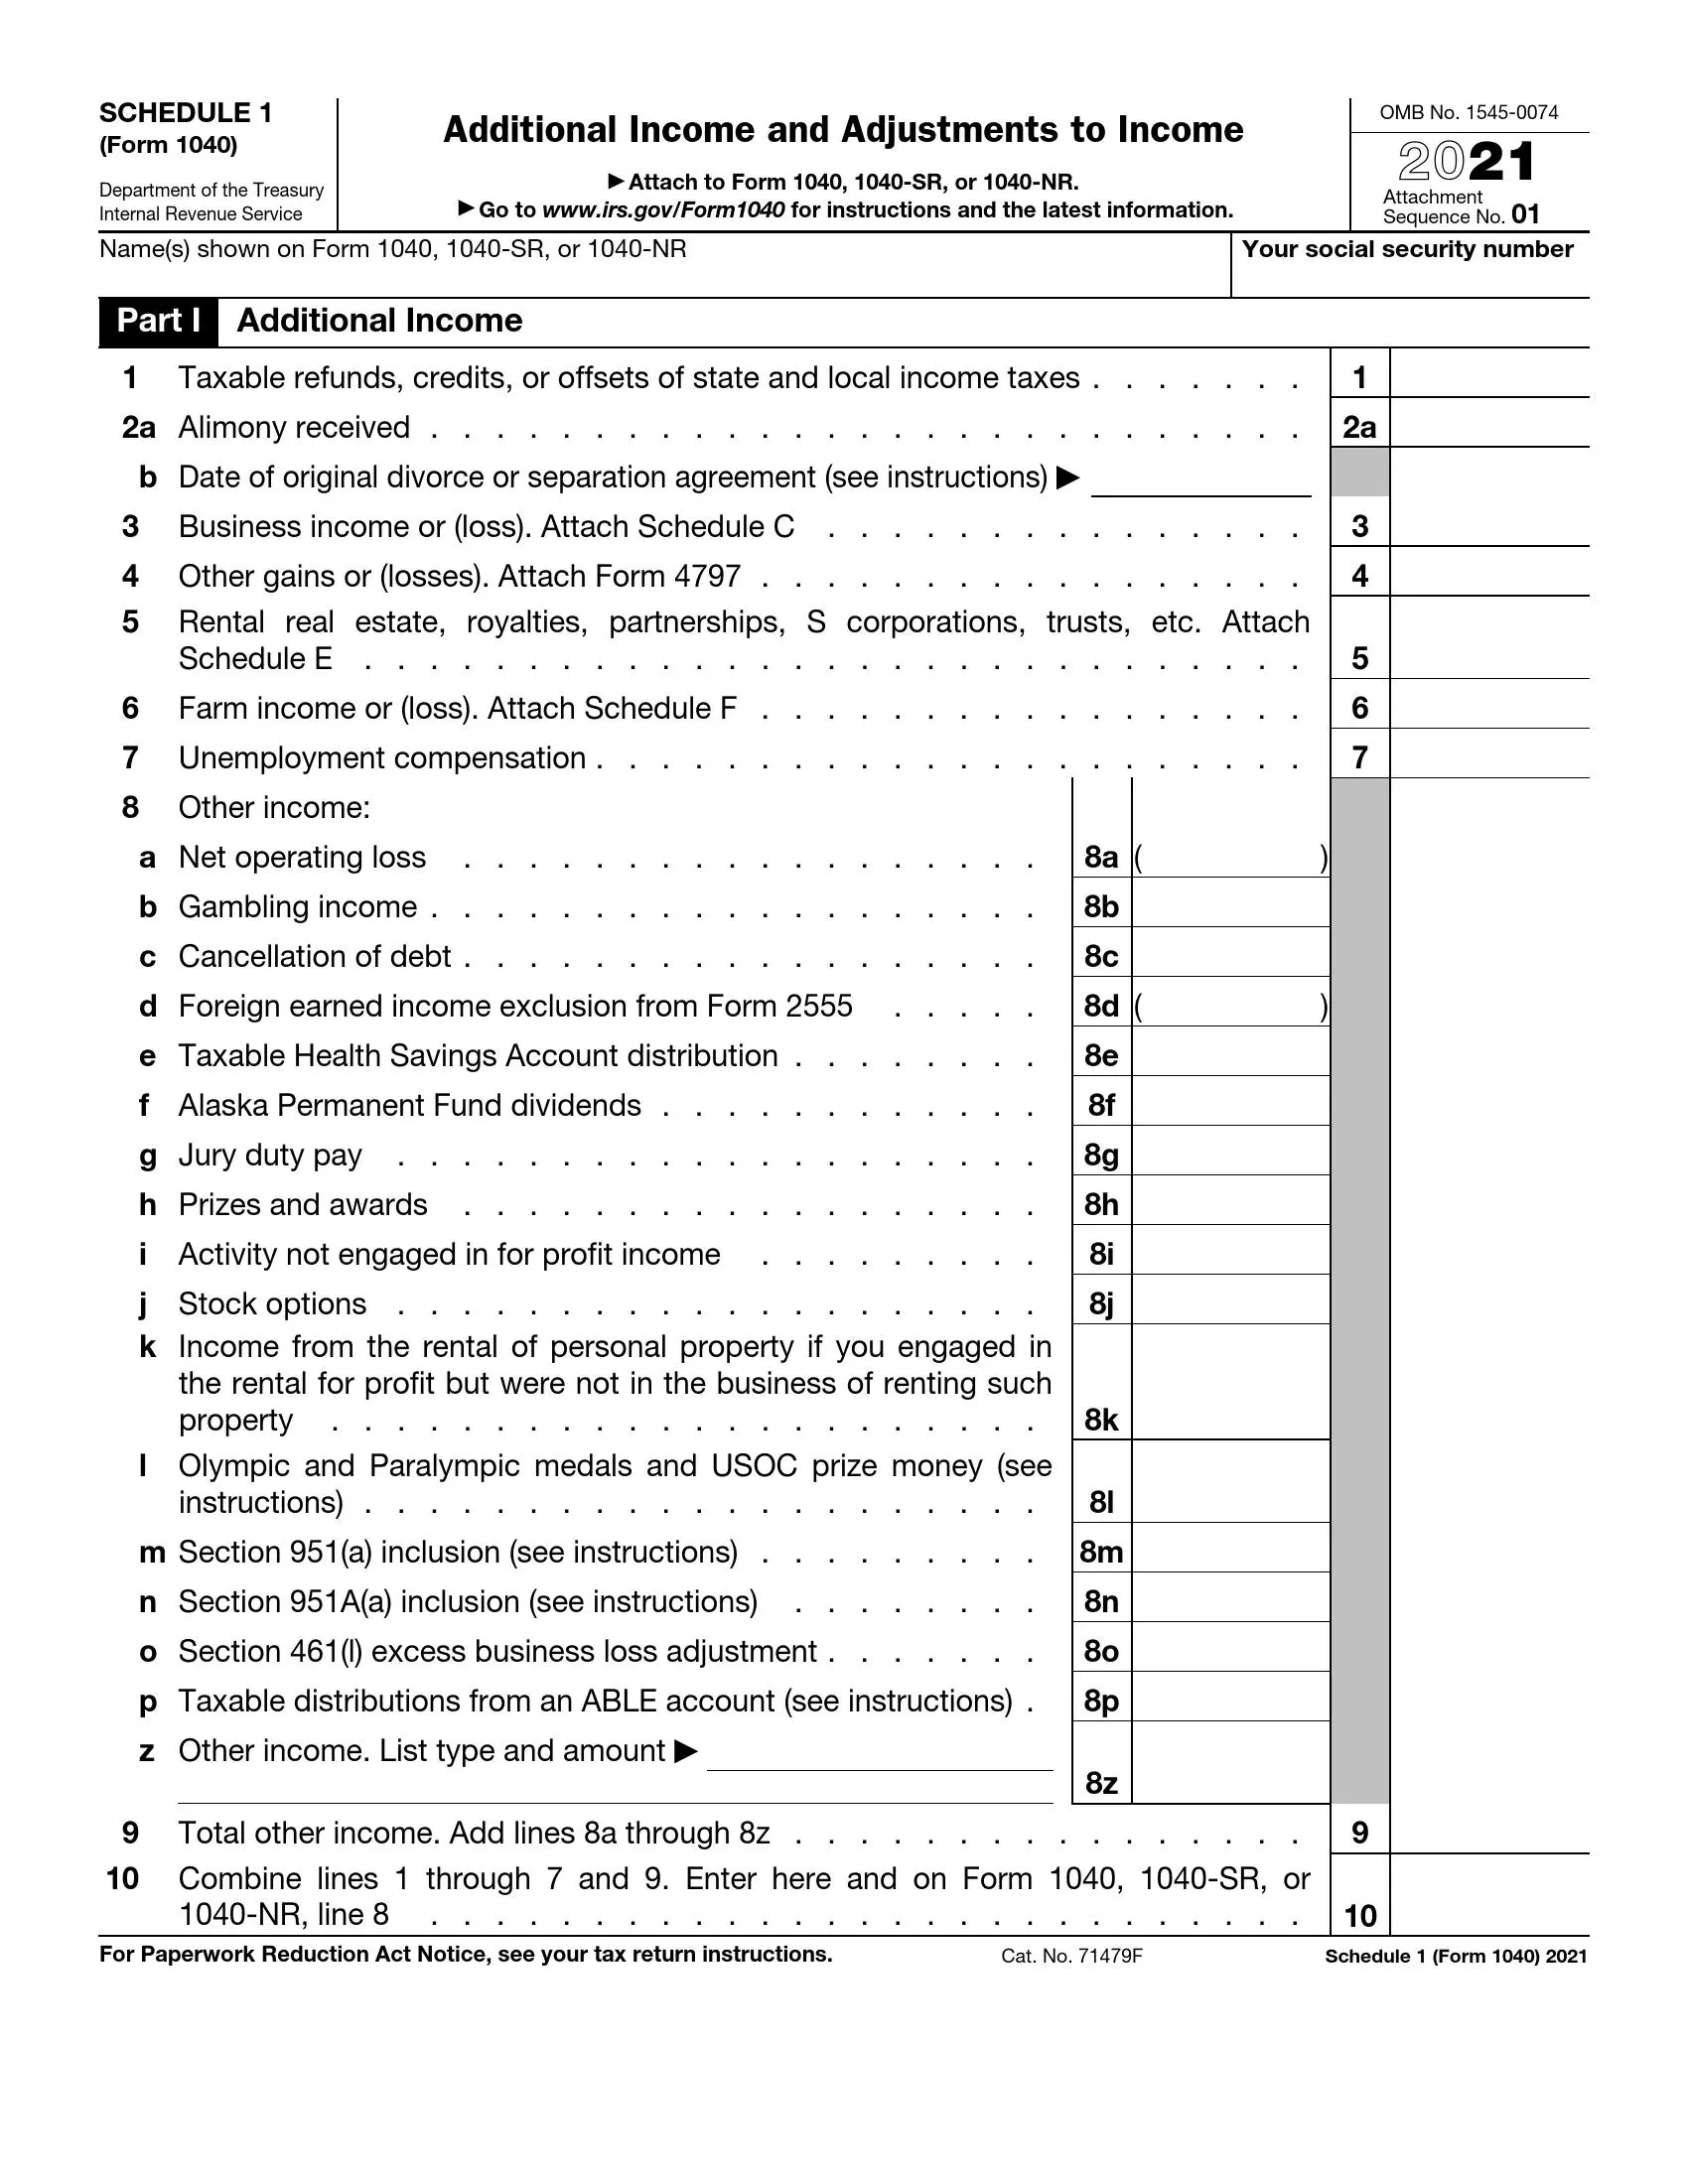 Irs Schedule 1 2022 Irs Schedule 1 Form 1040 Or 1040-Sr ≡ Fill Out Pdf Forms Online